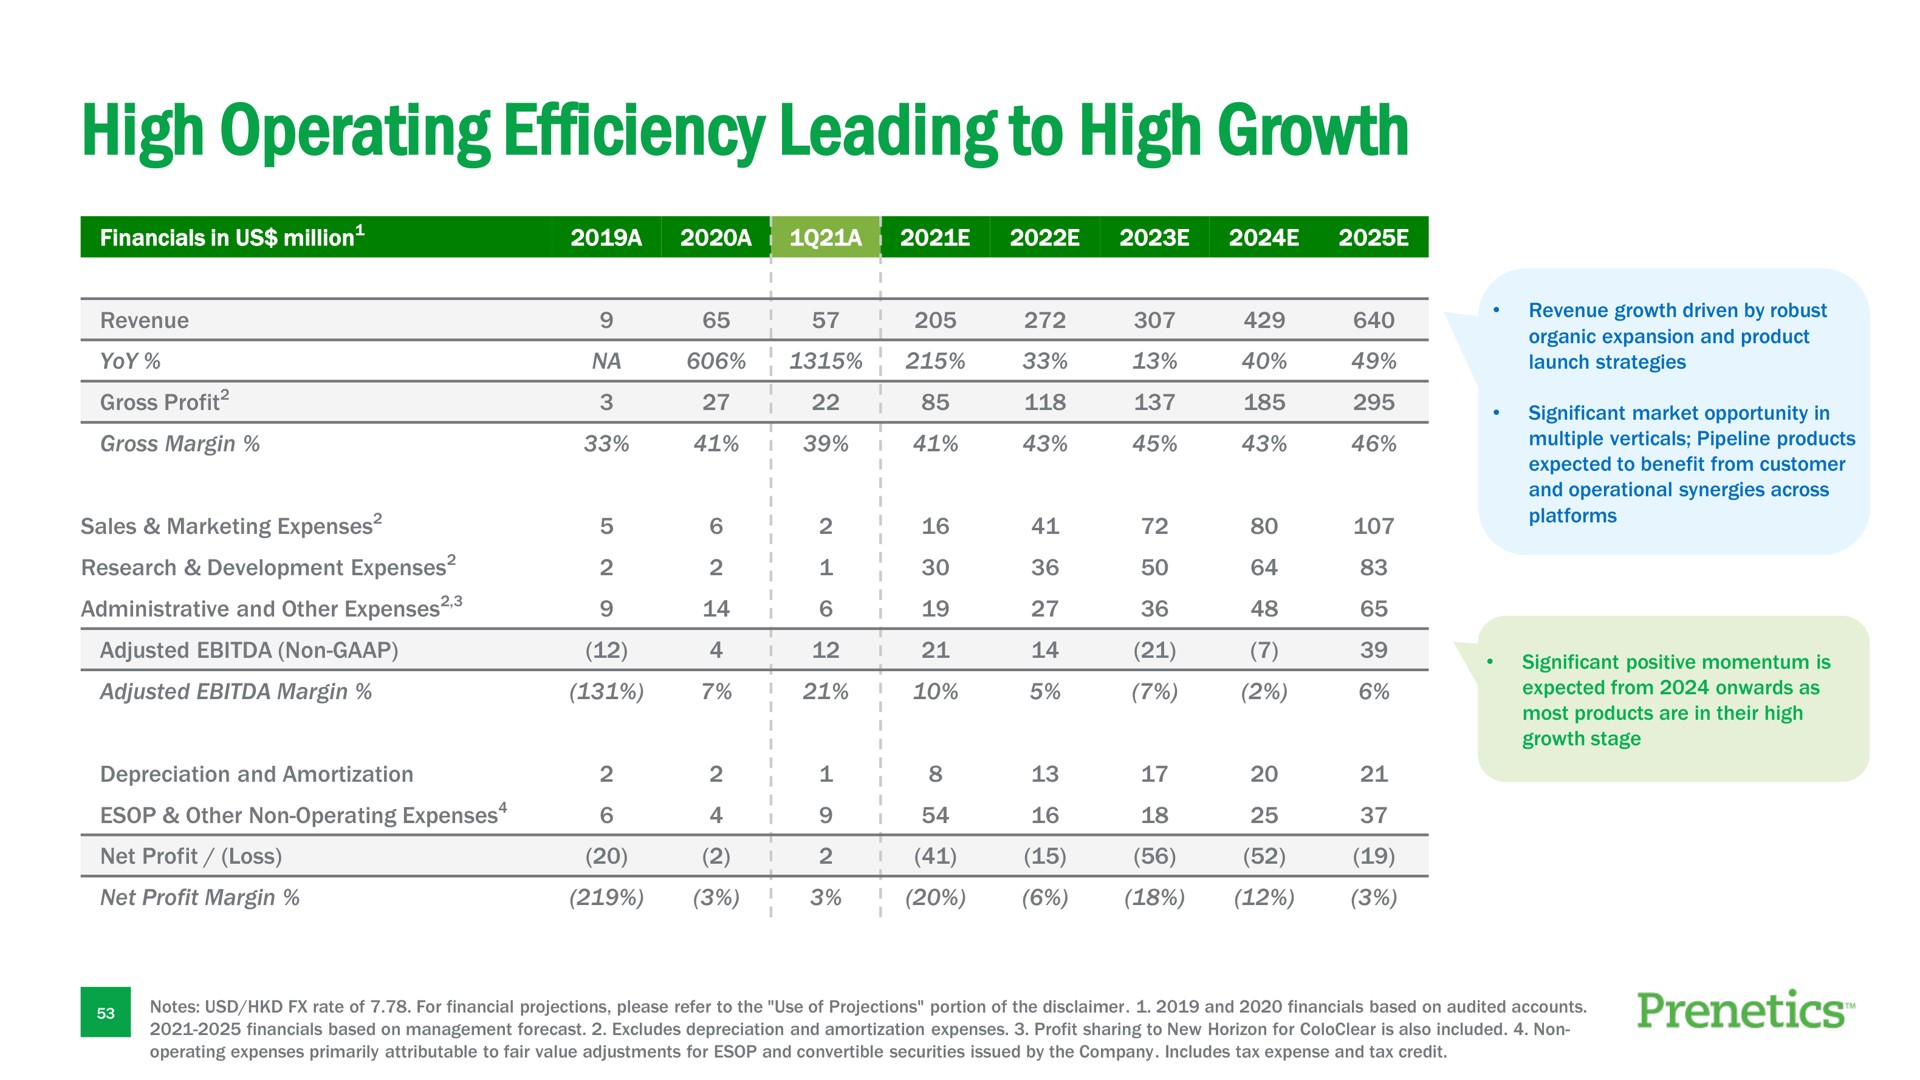 high operating efficiency leading to high growth | Prenetics